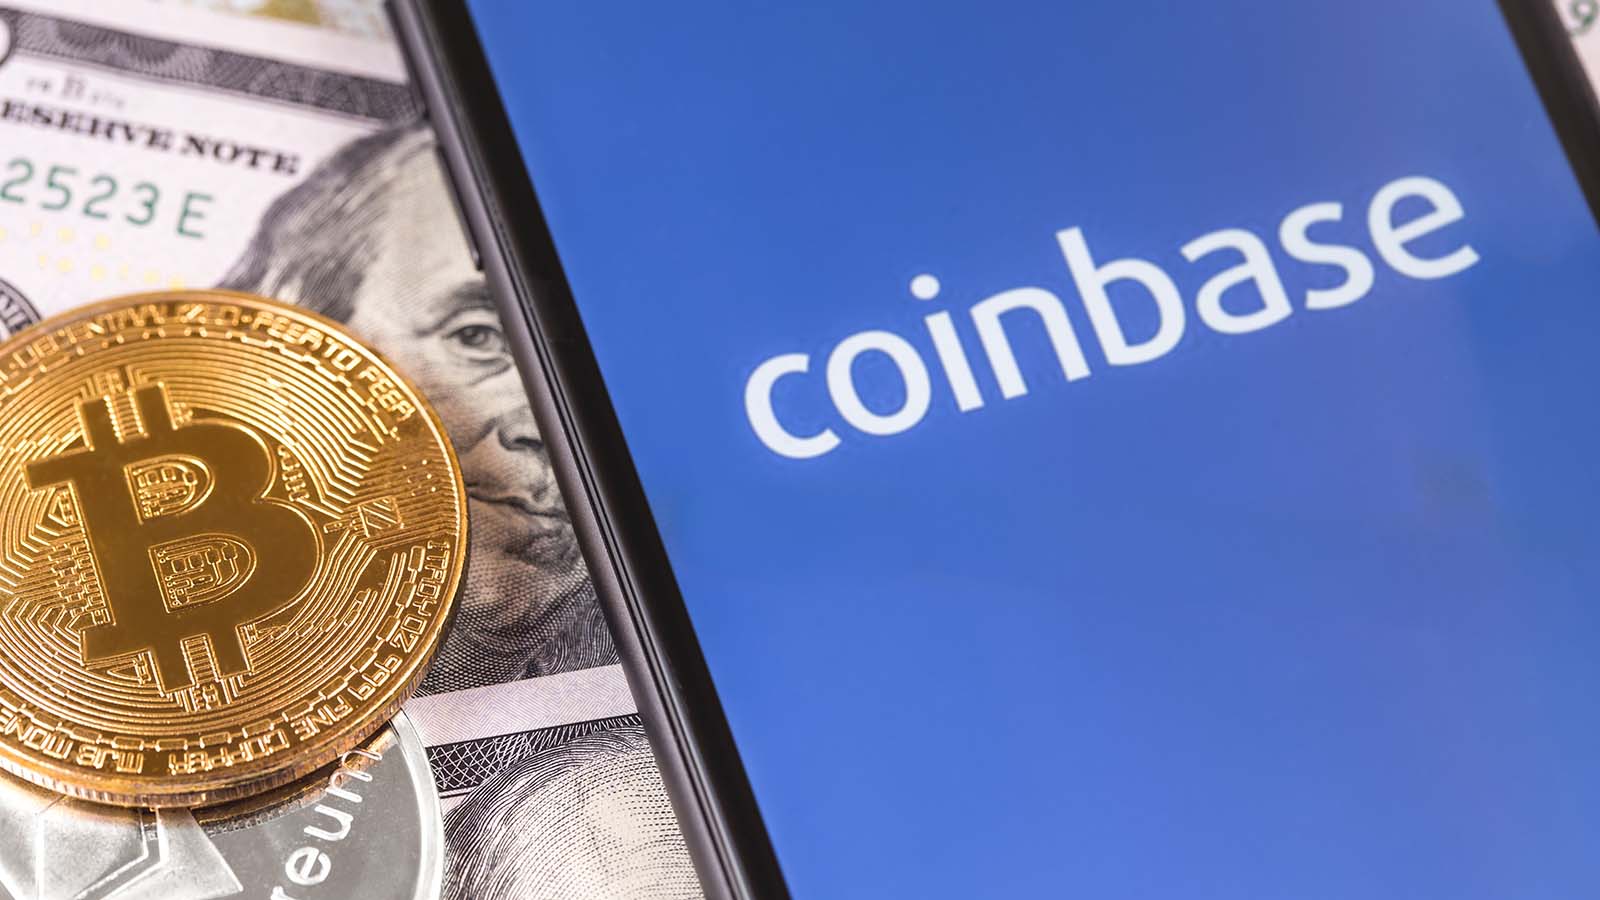 new coins on coinbase today